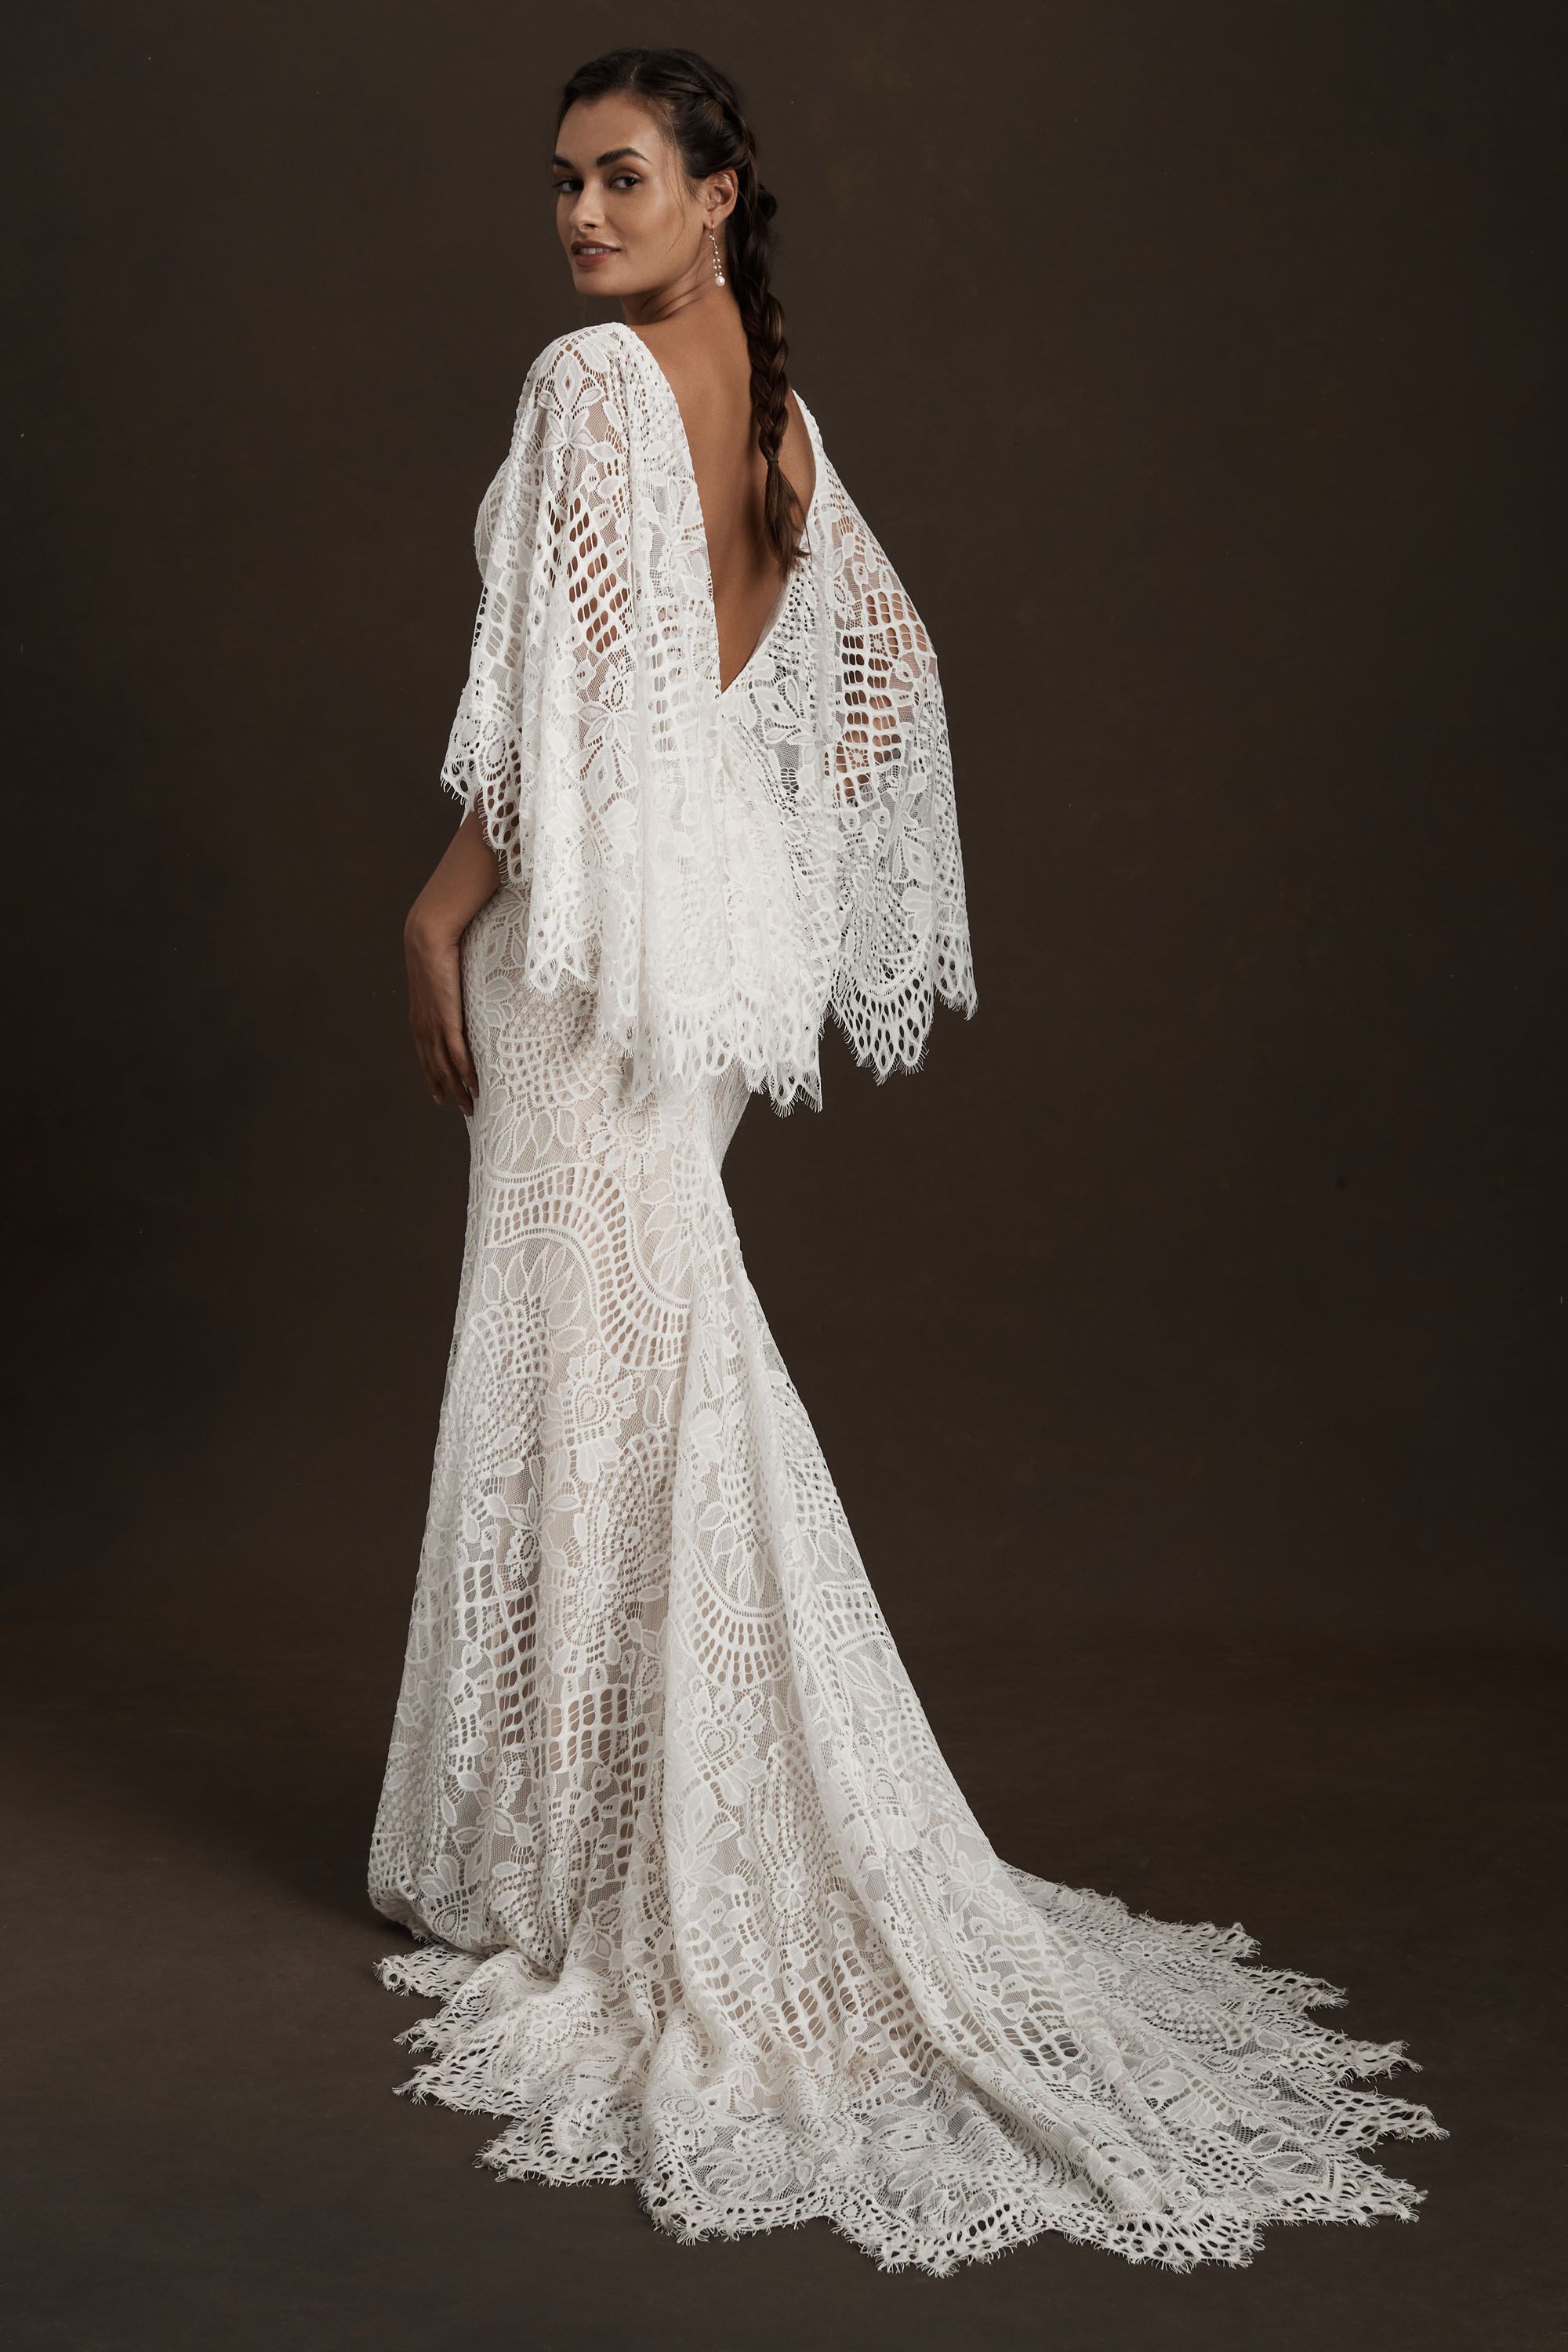 Made from intricate graphic lace, this fitted gown features a plunging v-neckline and dramatic train. The cascading flutter sleeves transform into a gorgeous cape detail to frame the open back